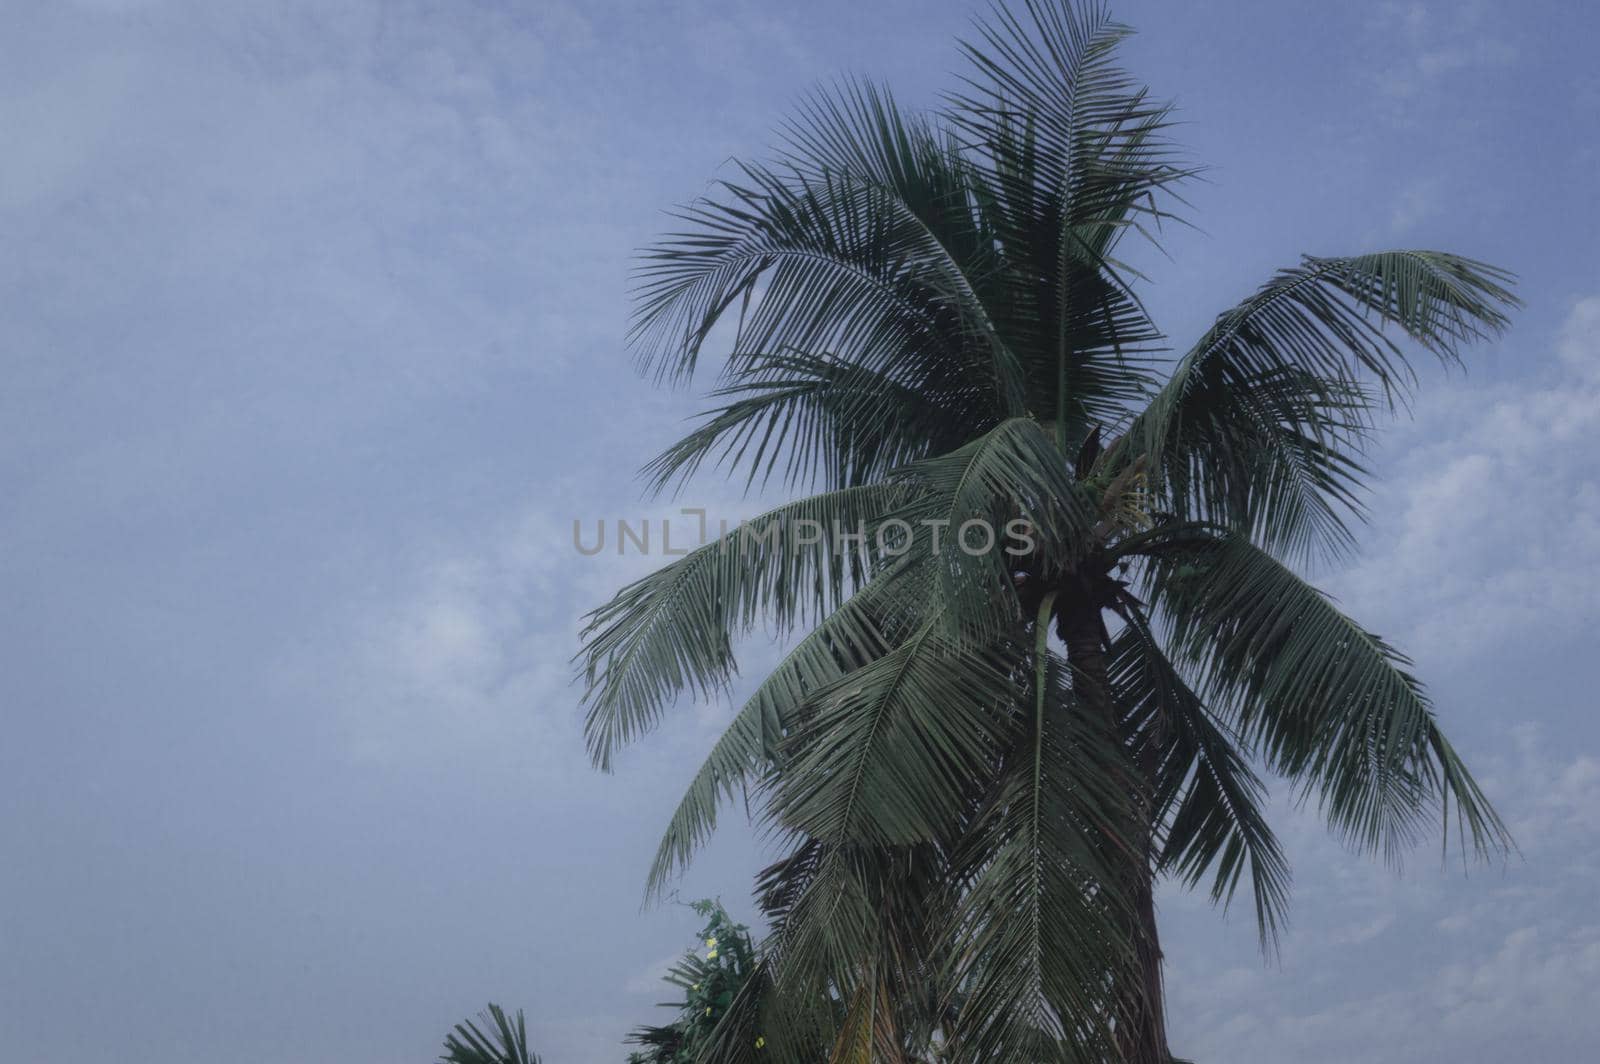 Coconut Palm tree background photo in Autumn seasonal theme back-lit but vibrant color sunrise sky. Palm tree in illuminated by sunlight. Goa Sea Beach India. Beauty in nature horizon Backgrounds.